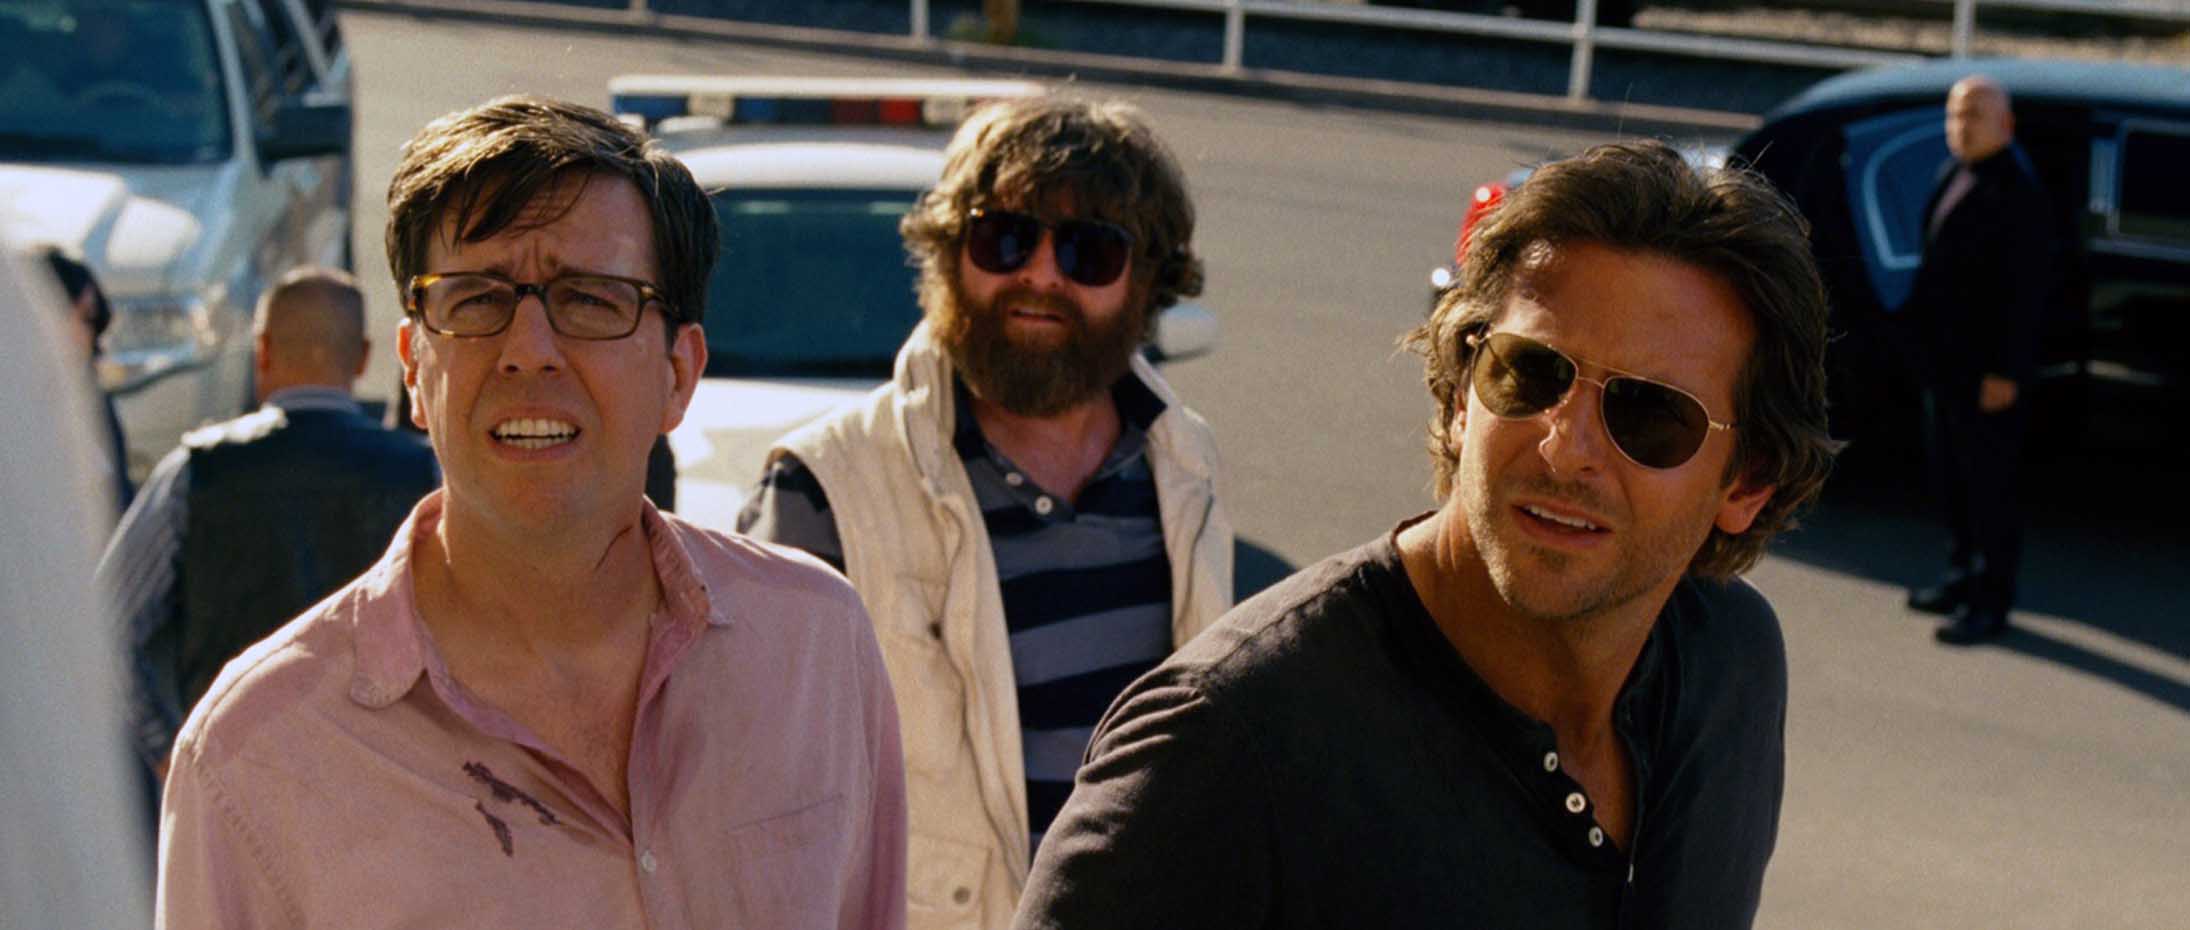 The Hangover Part III - Electric Shadows